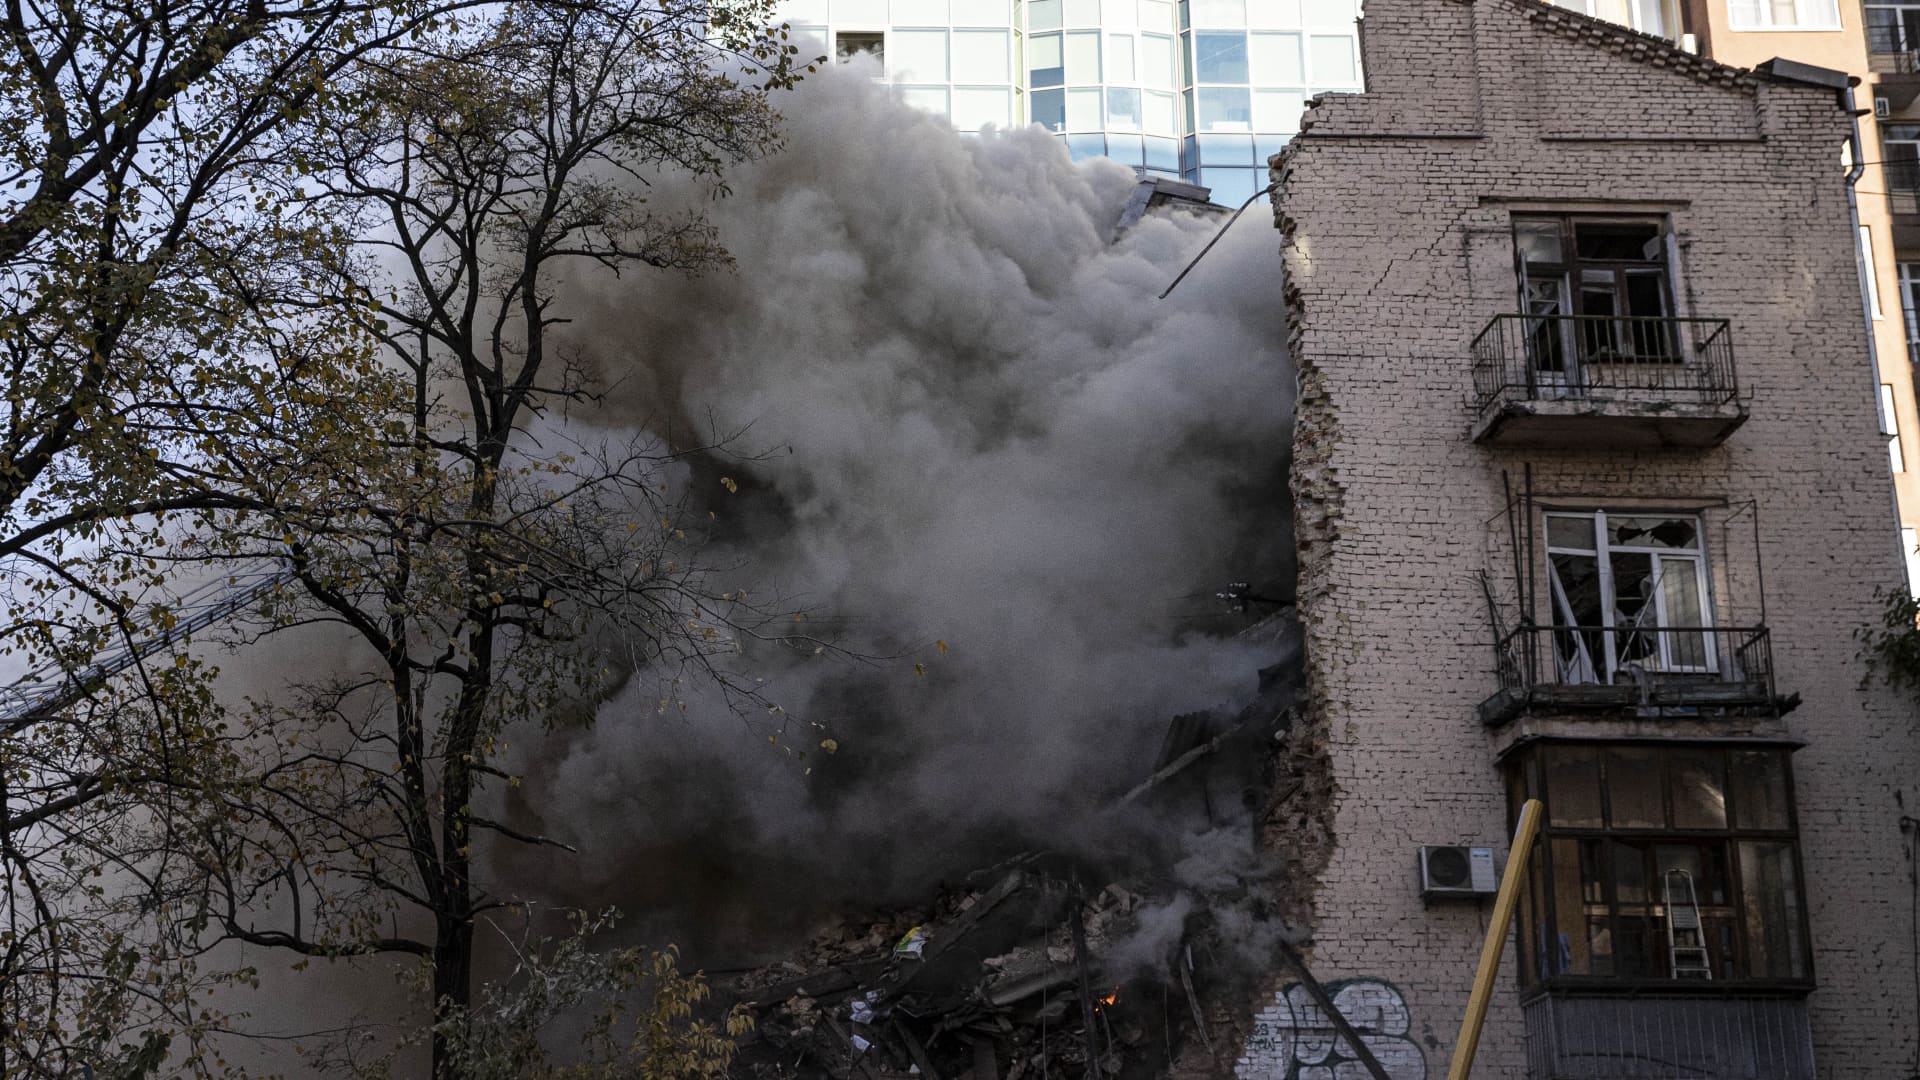 Smoke rises from a destroyed building after Russian attacks in Kyiv, Ukraine on October 17, 2022. It was reported that at least four explosions were heard in Ukraineâs capital Kyiv on Monday as authorities reported attacks by Russian kamikaze drones.